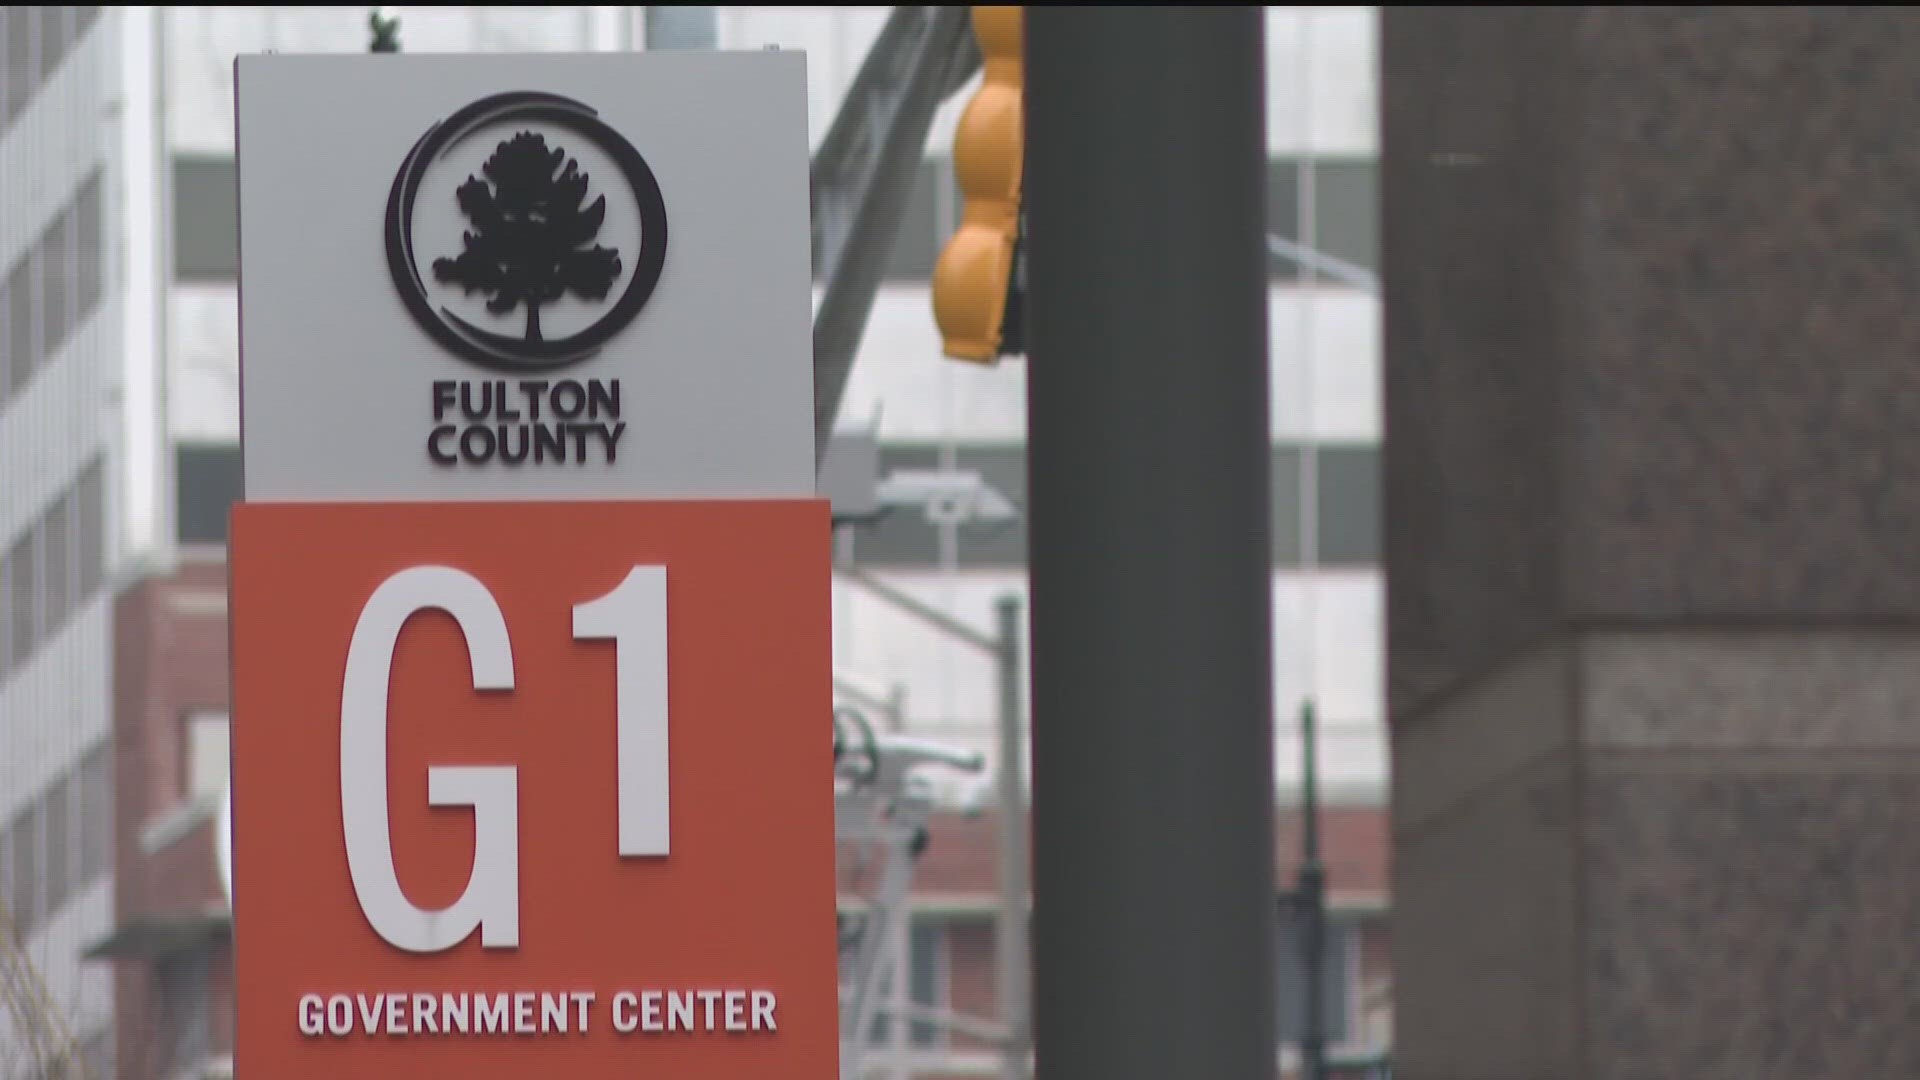 The group responsible said it wants Fulton County to pay a ransom or it will release sensitive information.